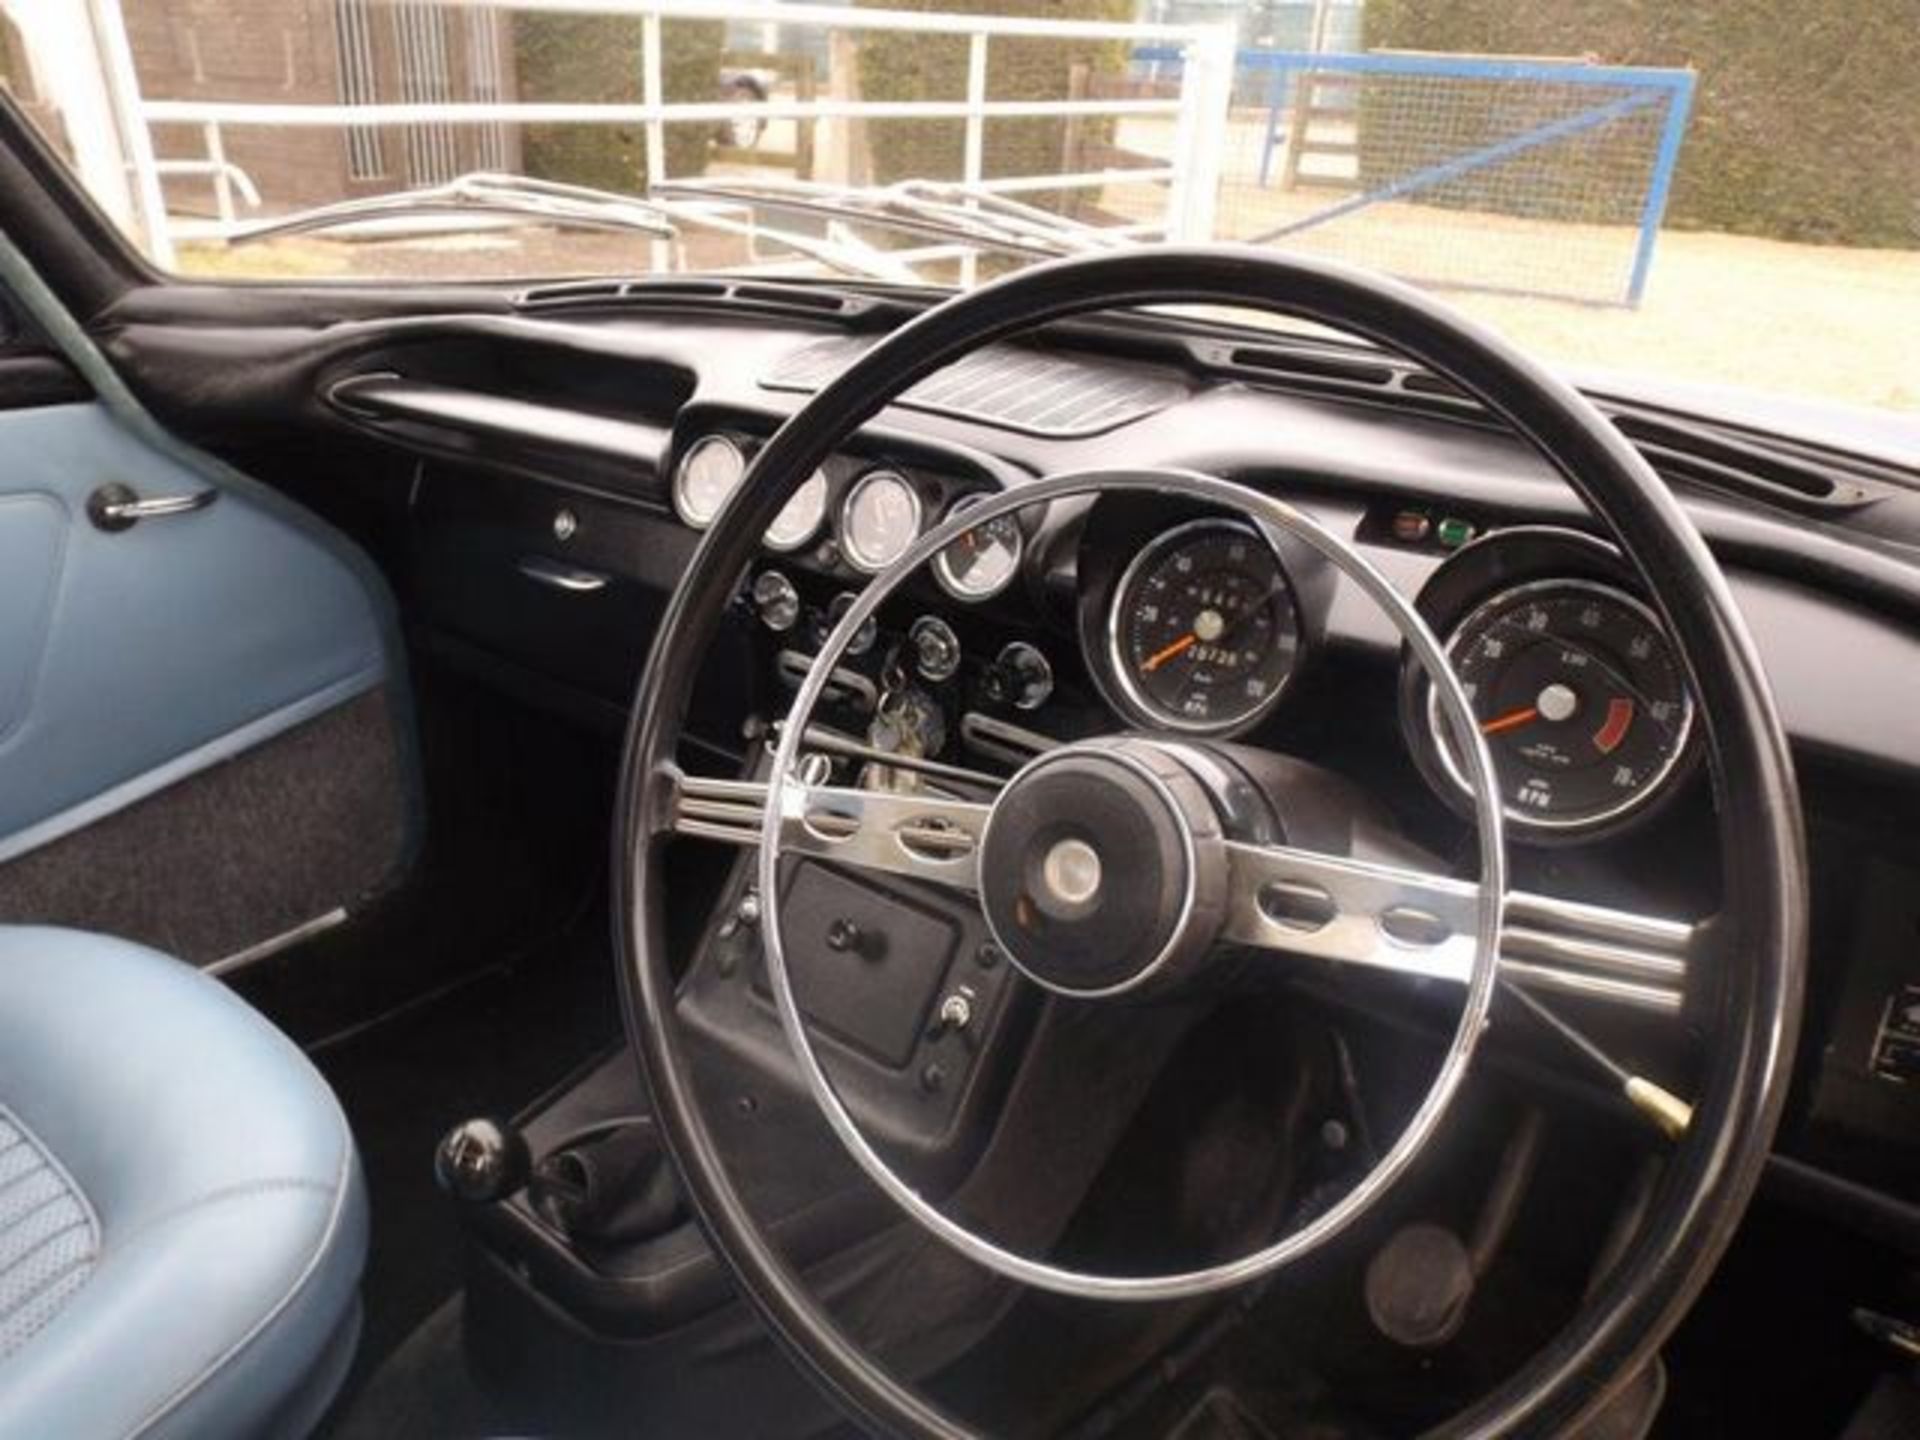 HUMBER, SCEPTRE MKII - 1725cc, Chassis number B1320056320DHS0 - this is a Mark II example which - Image 6 of 18